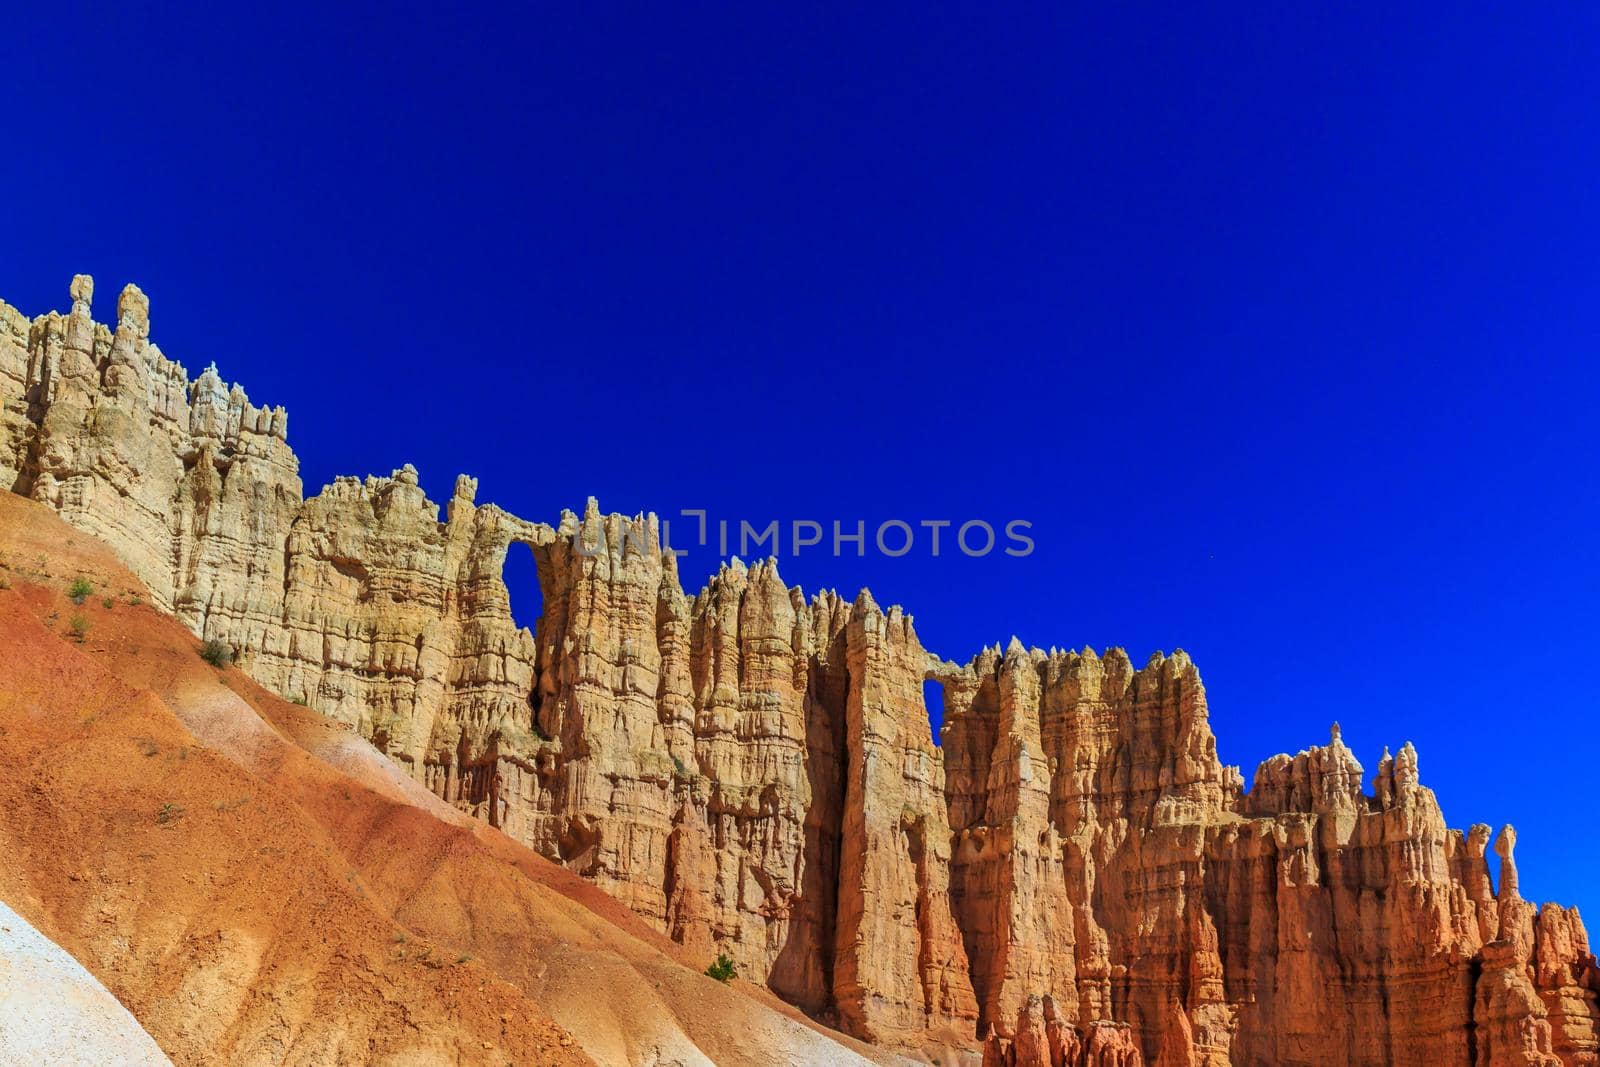 Windows in a cliffwall of hoodoos at the 'Wall of Windows' in Bryce Canyon National Park, Utah.